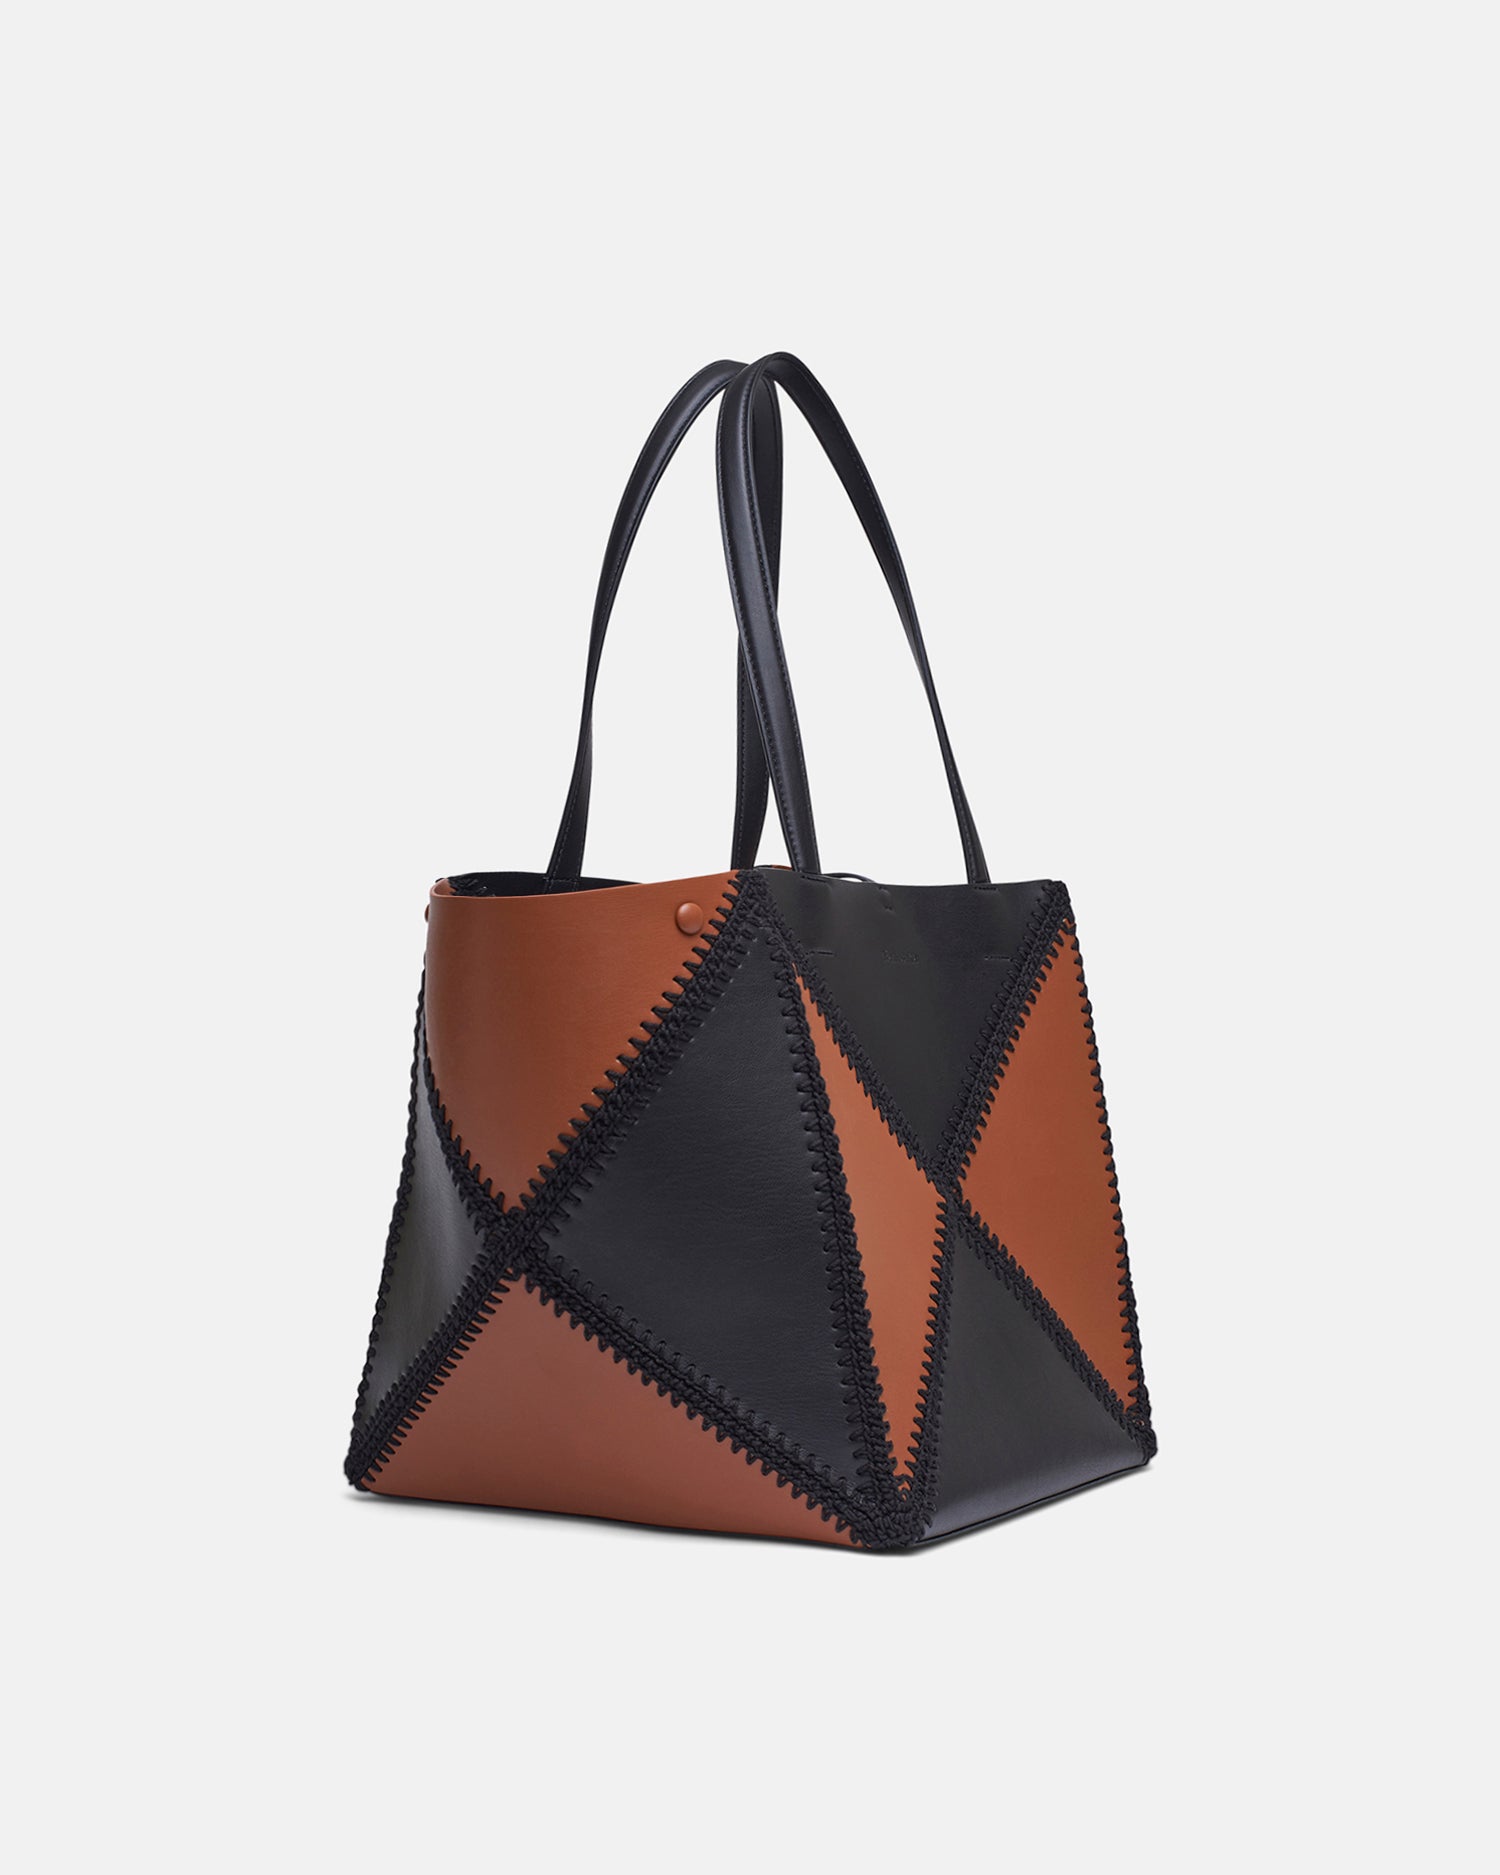 How to make an origami tote bag 